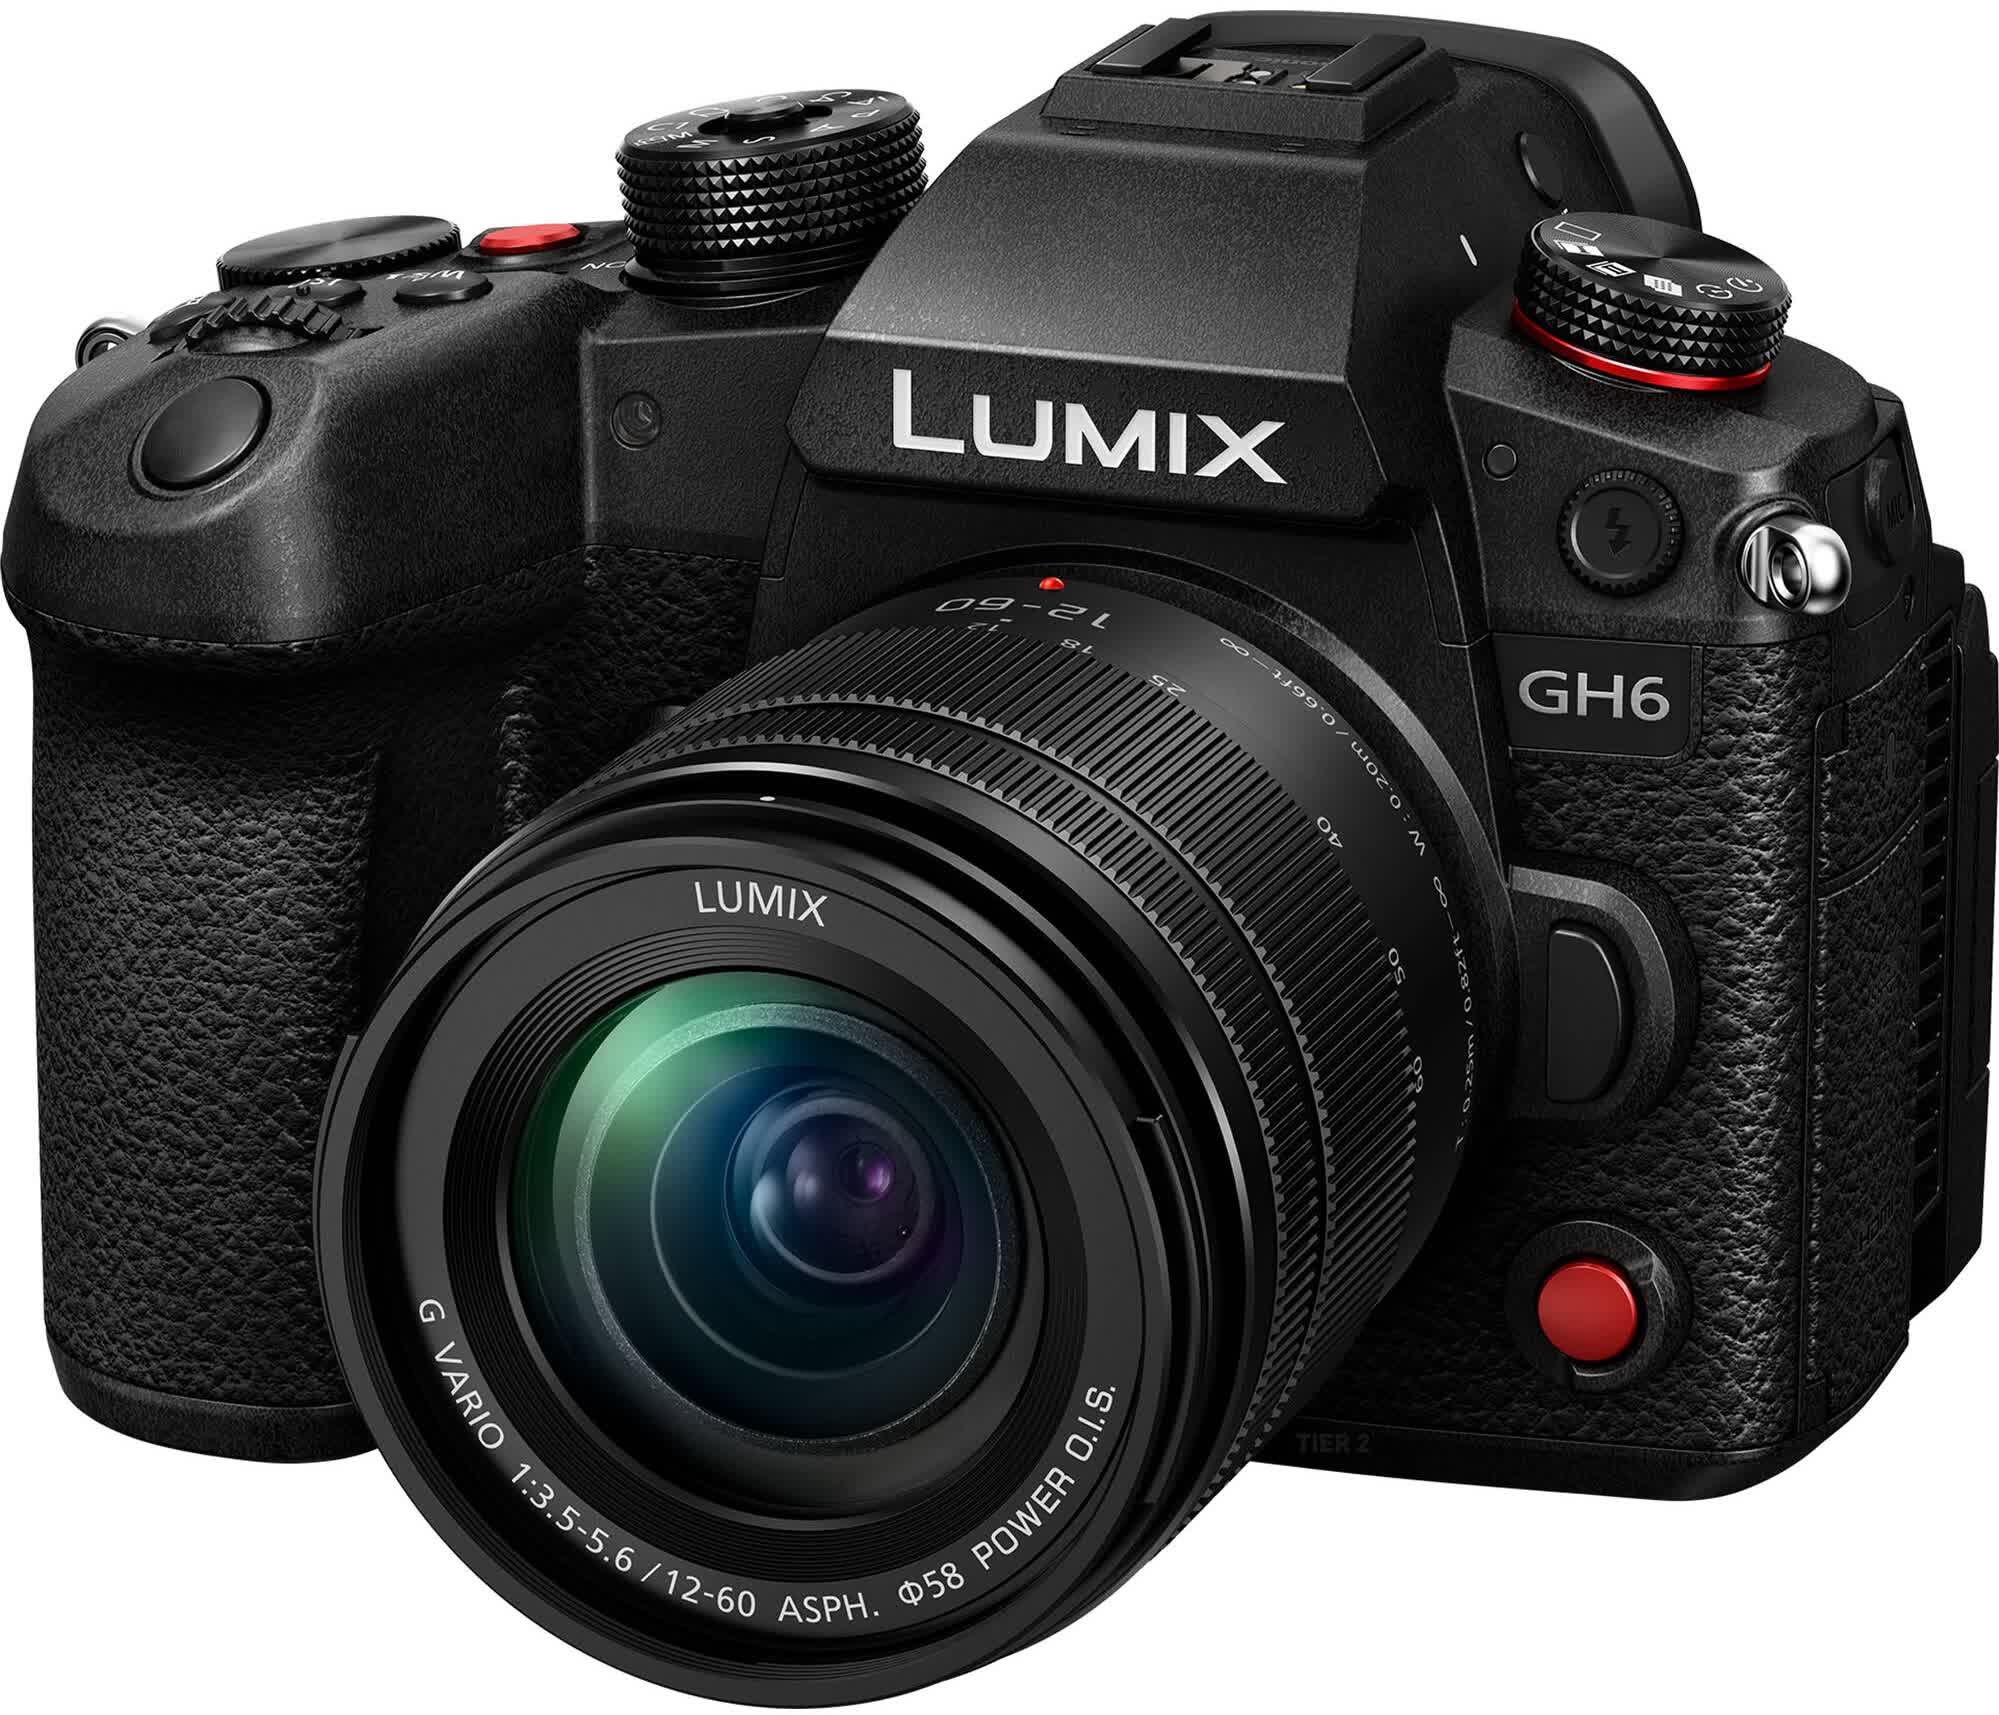 Panasonic's Lumix GH6 features the highest resolution sensor ever in a Micro Four Thirds camera